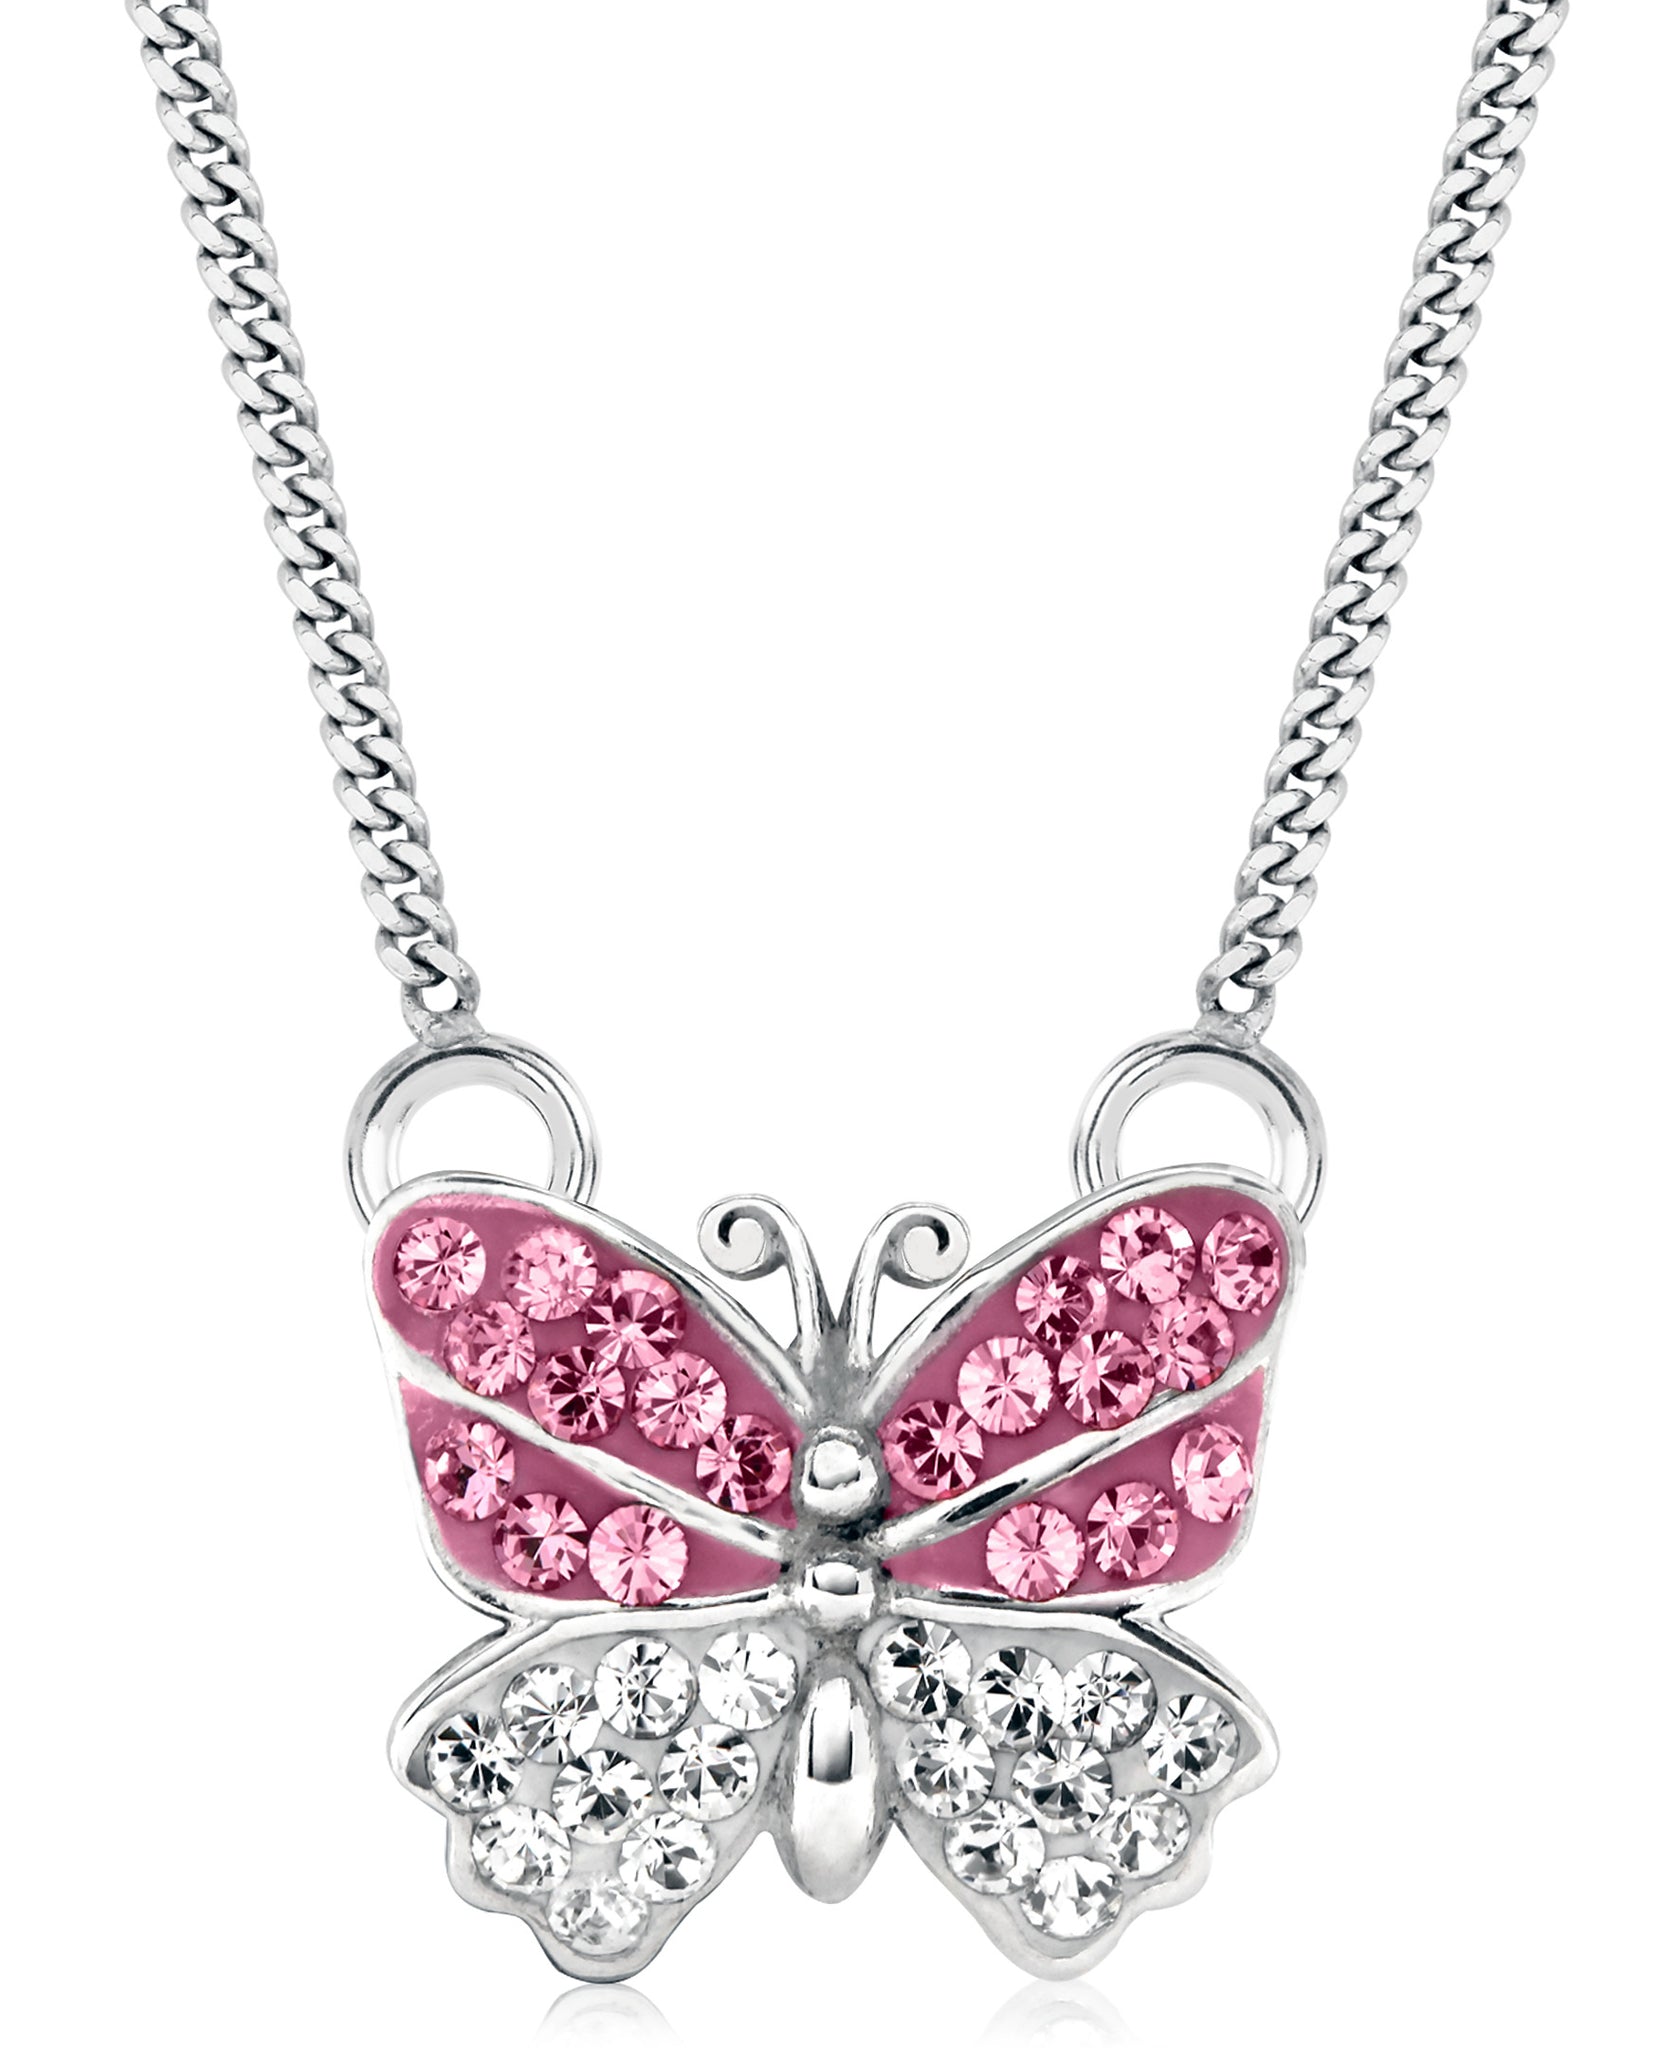 Children's Sterling Silver Crystal Butterfly Pendant Necklace - Rhona Sutton Jewellery